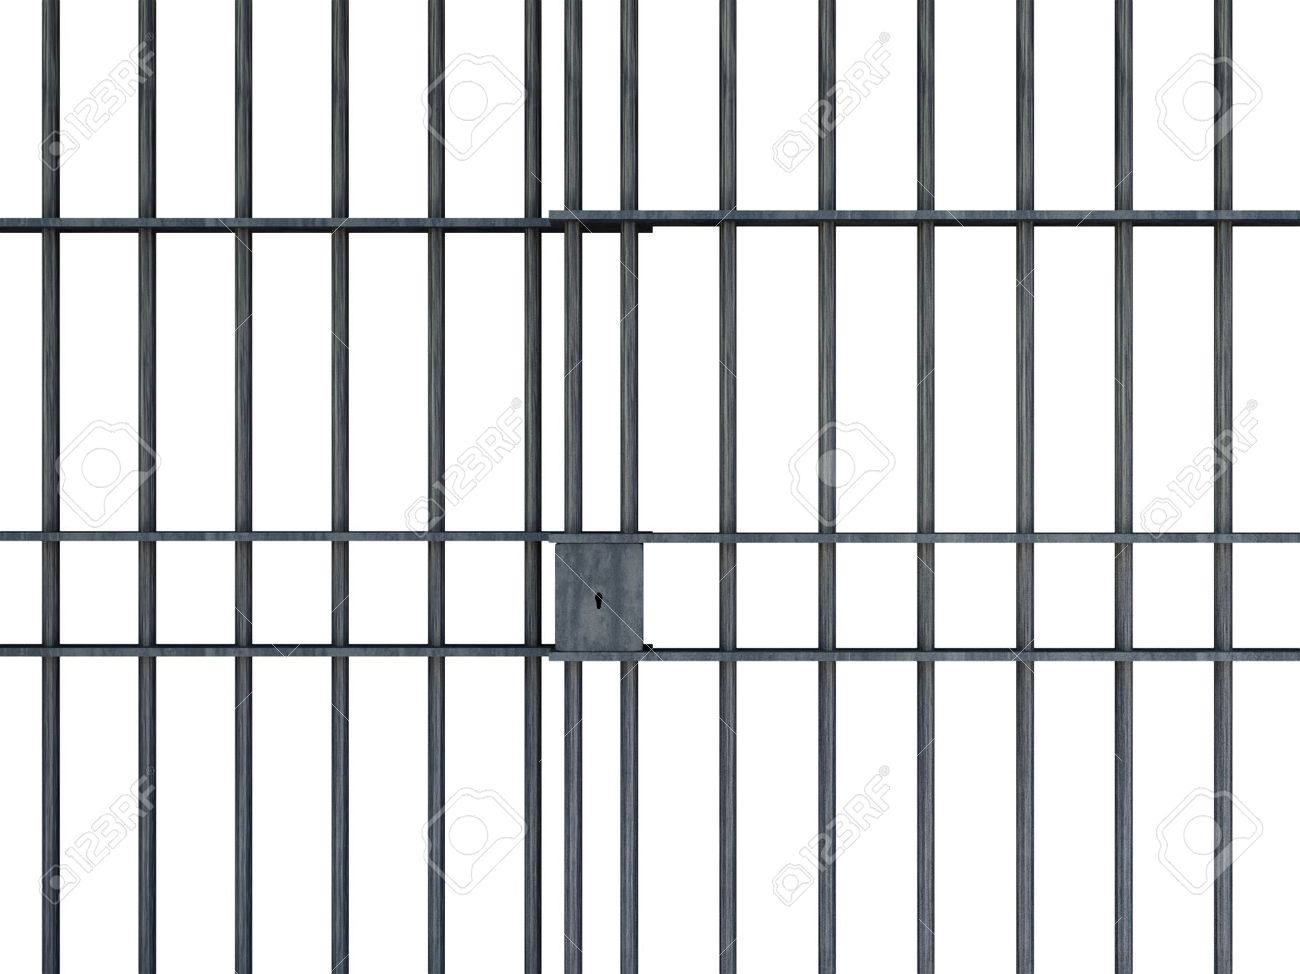 Jail Bars Isolated On White Background Stock Photo Picture And